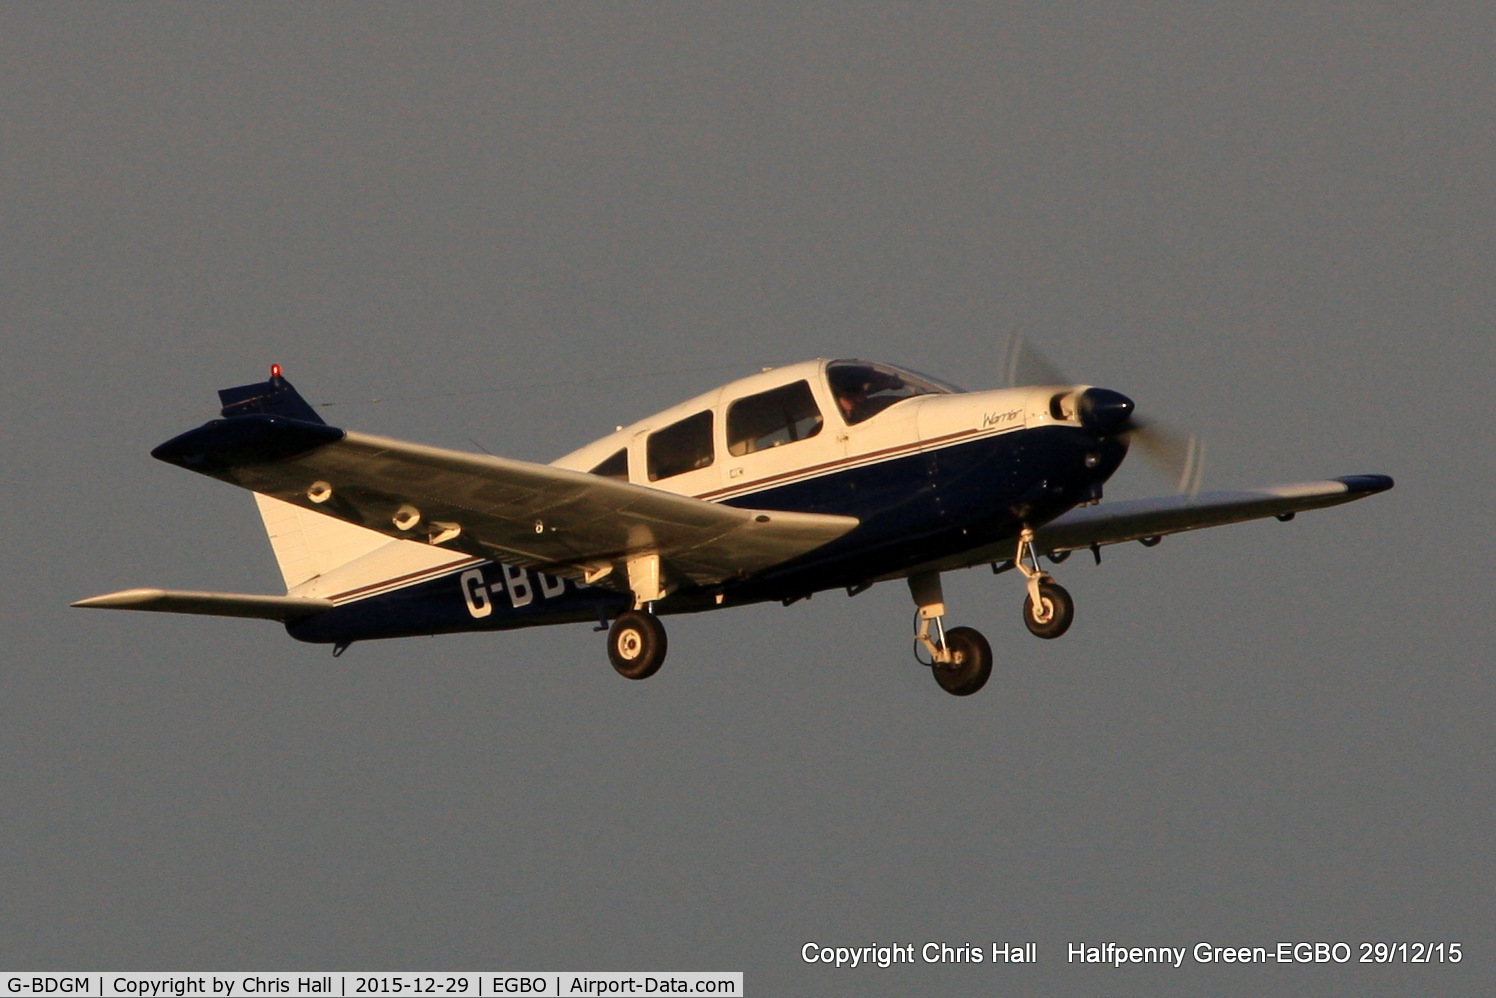 G-BDGM, 1974 Piper PA-28-151 Cherokee Warrior C/N 28-7415165, at Halfpenny Green